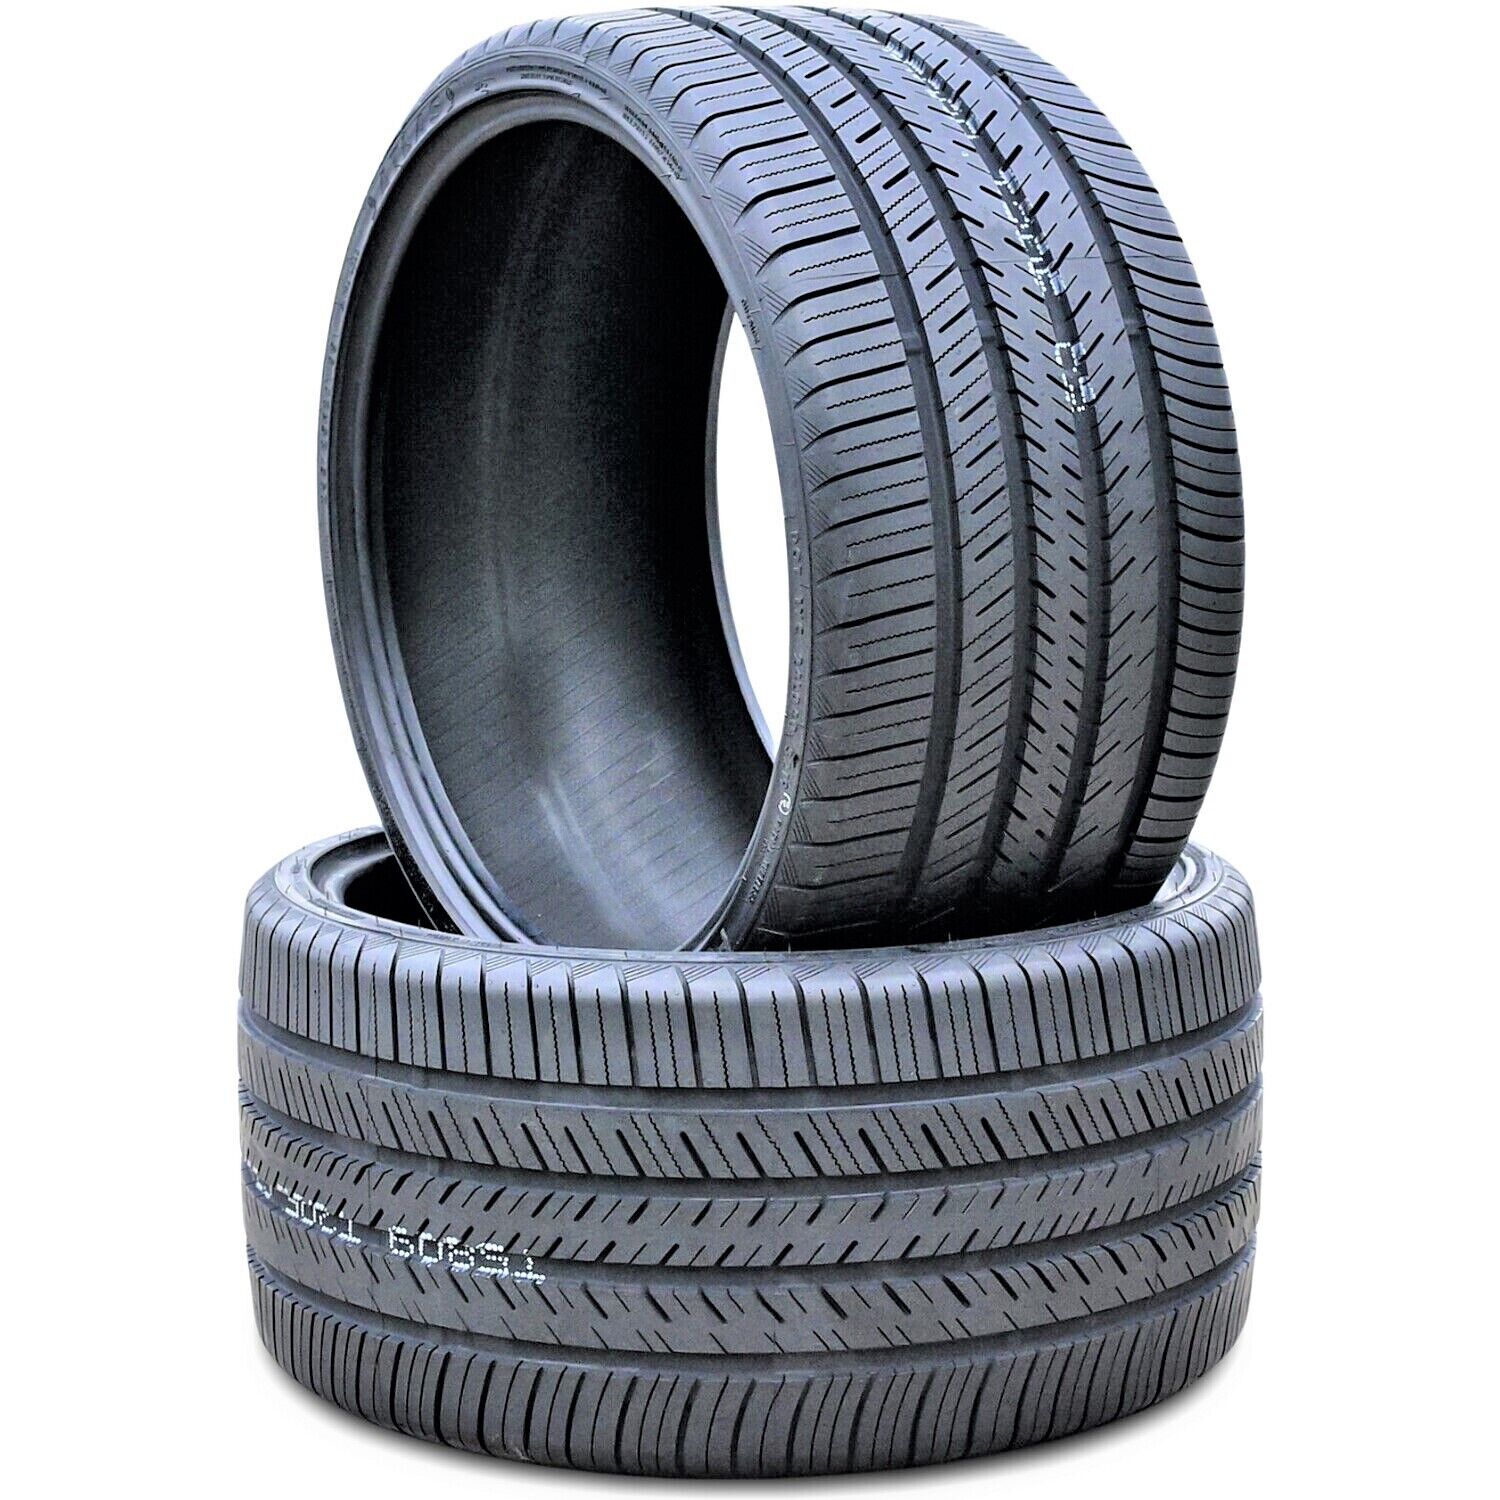 2 Tires Atlas Force UHP 275/30R20 97Y XL A/S High Performance